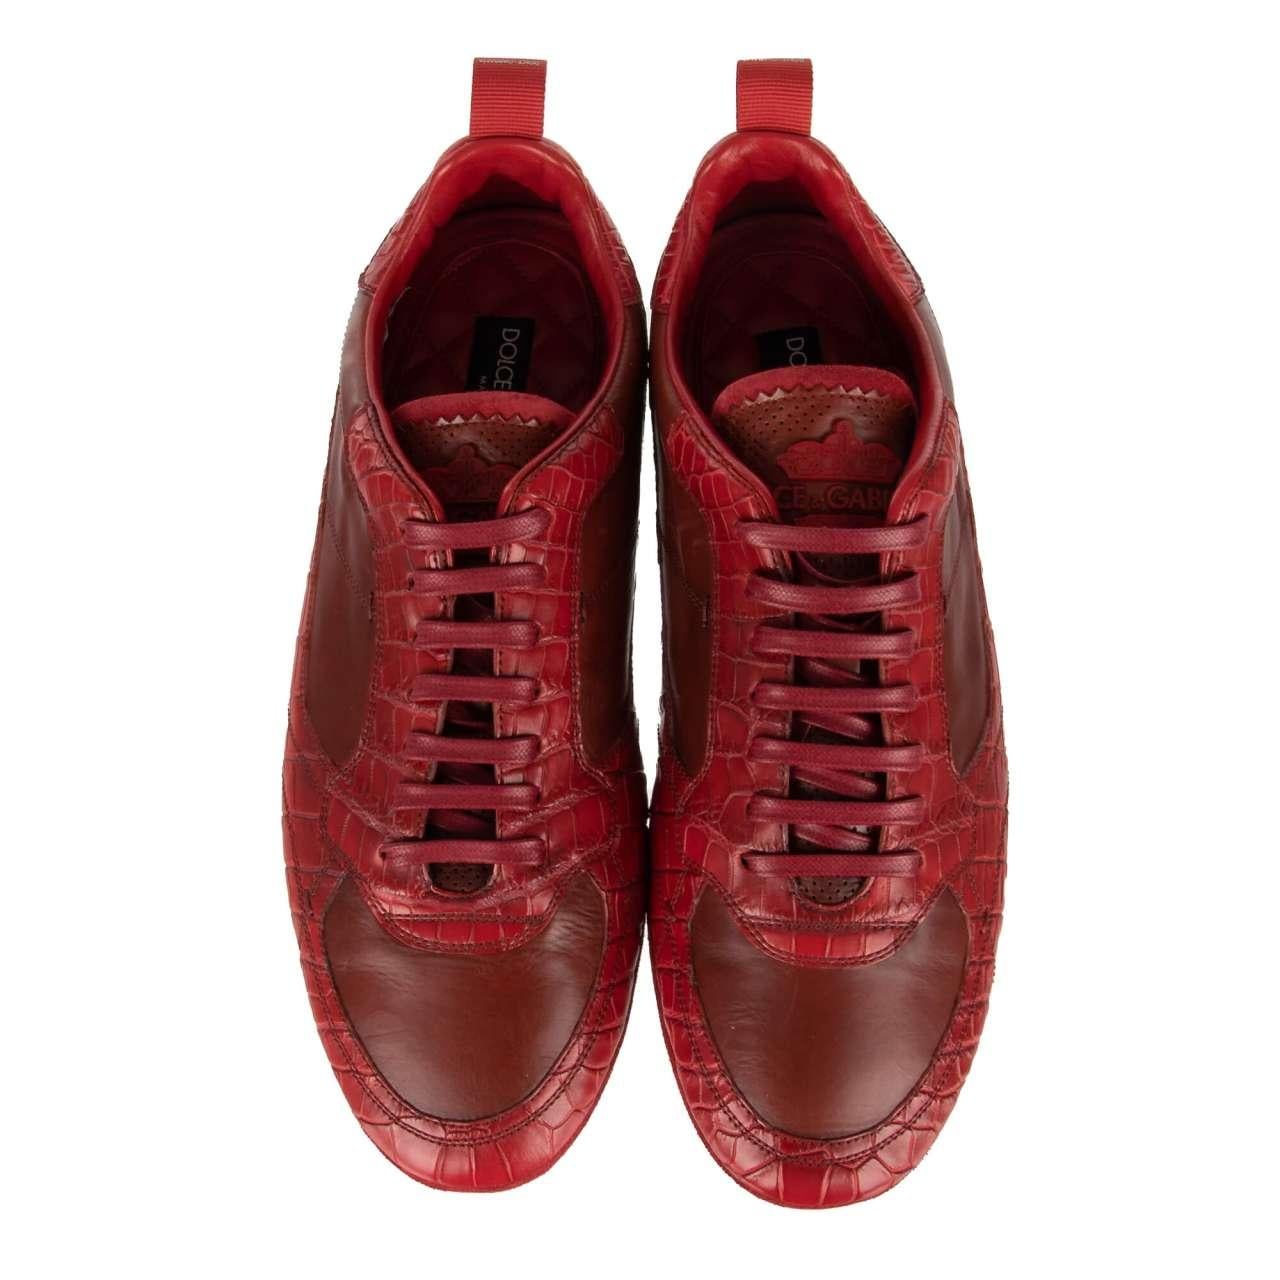 - Low-Top Crocodile leather mix Sneaker KING DRIVER with Crown logo in red by DOLCE & GABBANA - New with Box - MADE IN ITALY - Model: A20118-A2U72-89902 - Material: 60% Goatskin, 40% Crocodile - Sole: Rubber - Color: Red - Leather soft insole -